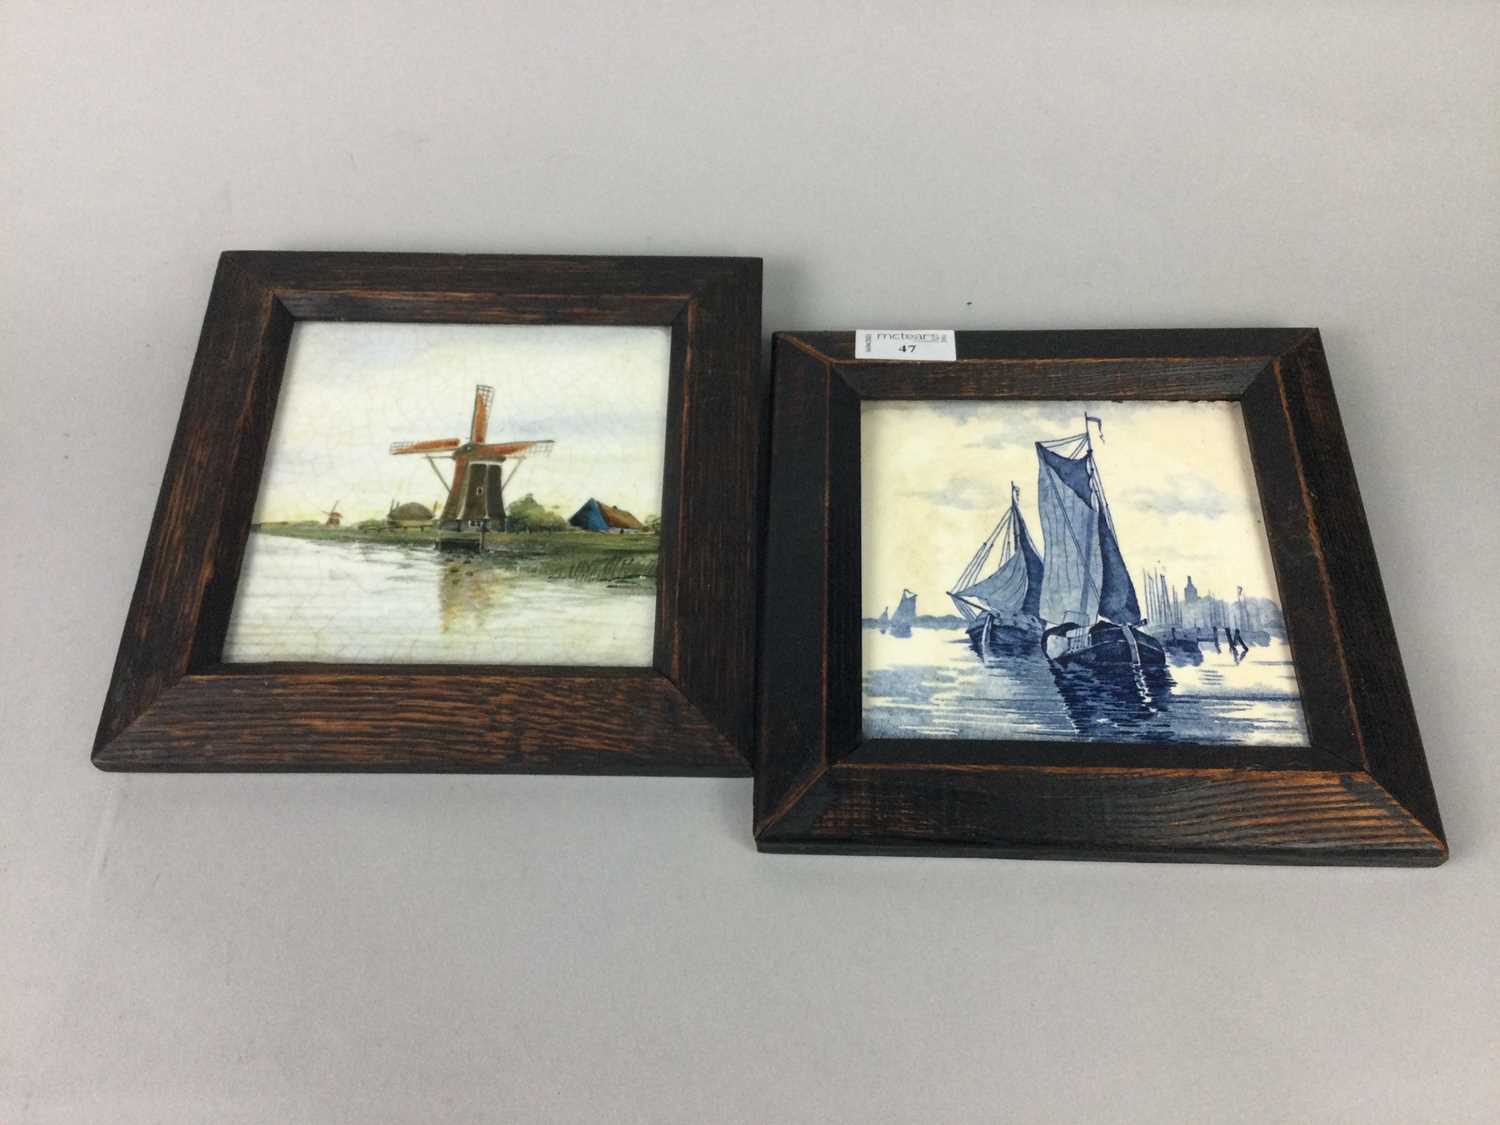 Lot 47 - A FRAMED DELFT STYLE BLUE AND WHITE TILE ALONG WITH ANOTHER